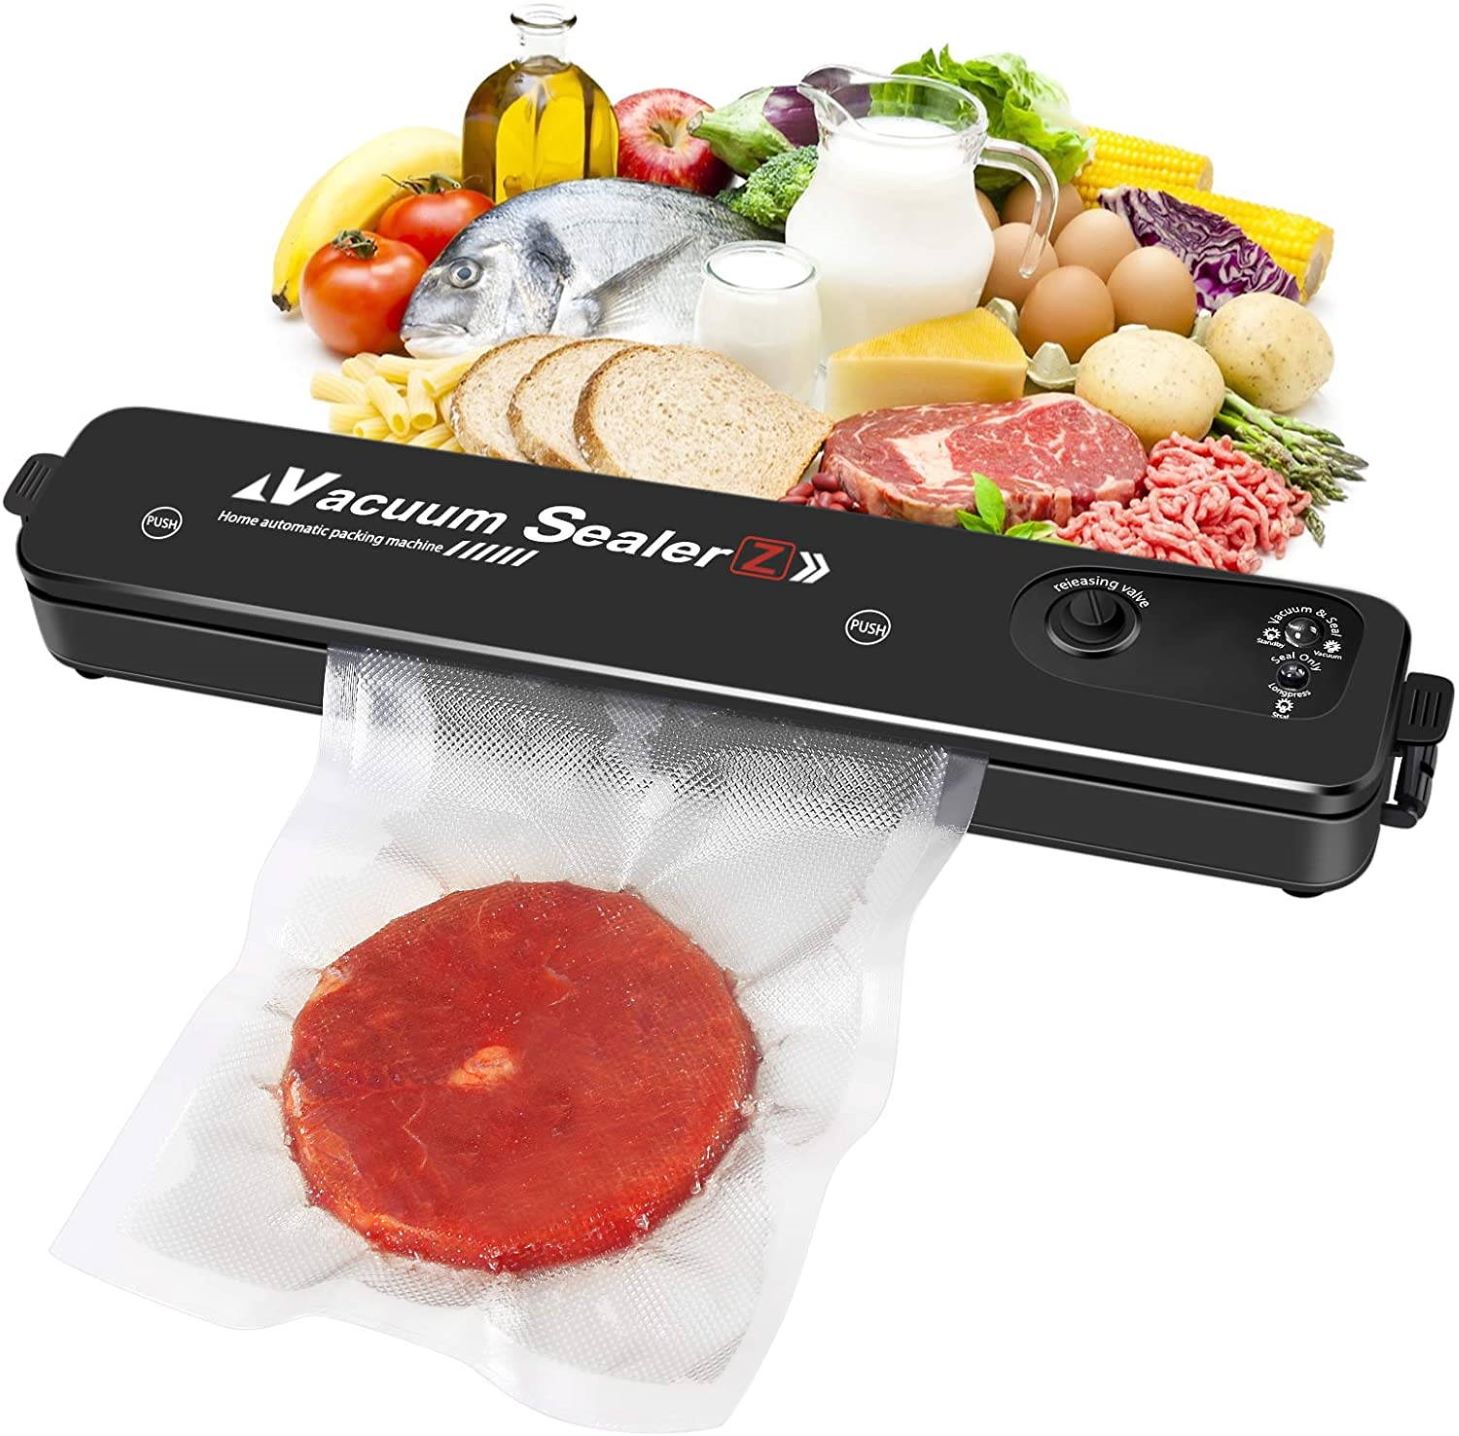 The 6 best Vacuum Sealer Machines and Vacuum Storage Bags to keep your food fresh